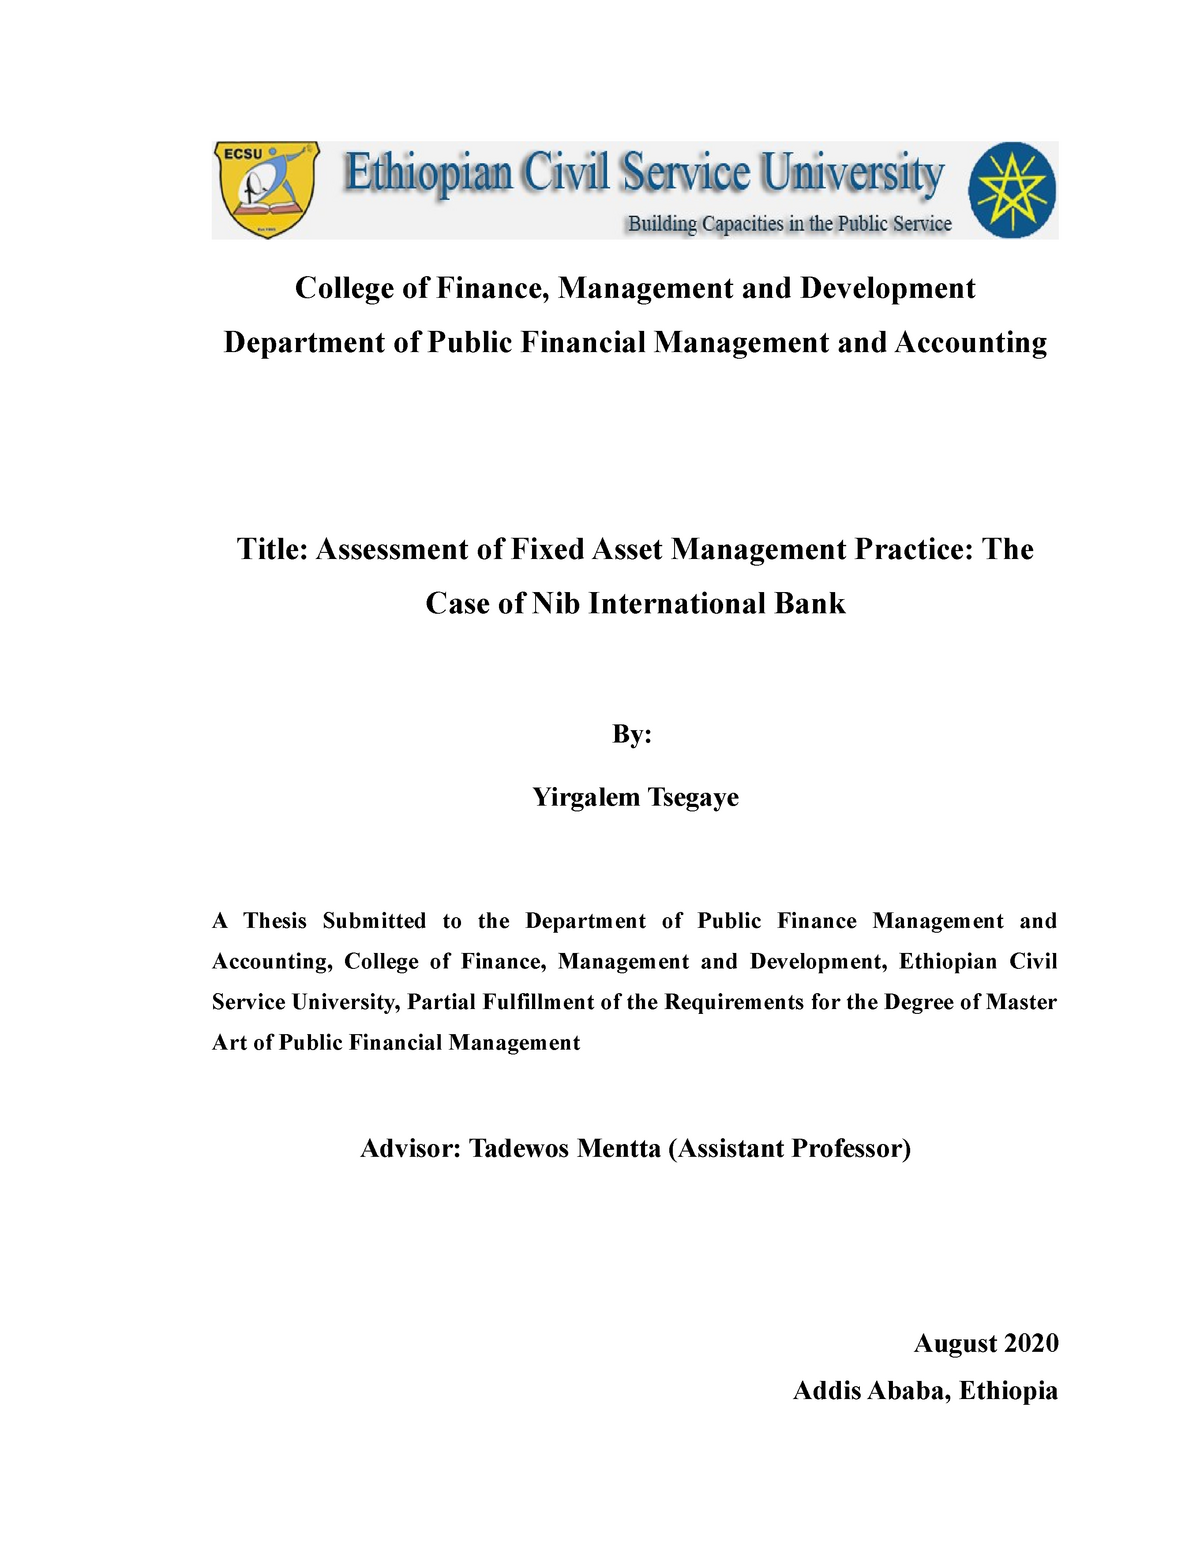 financial management thesis titles